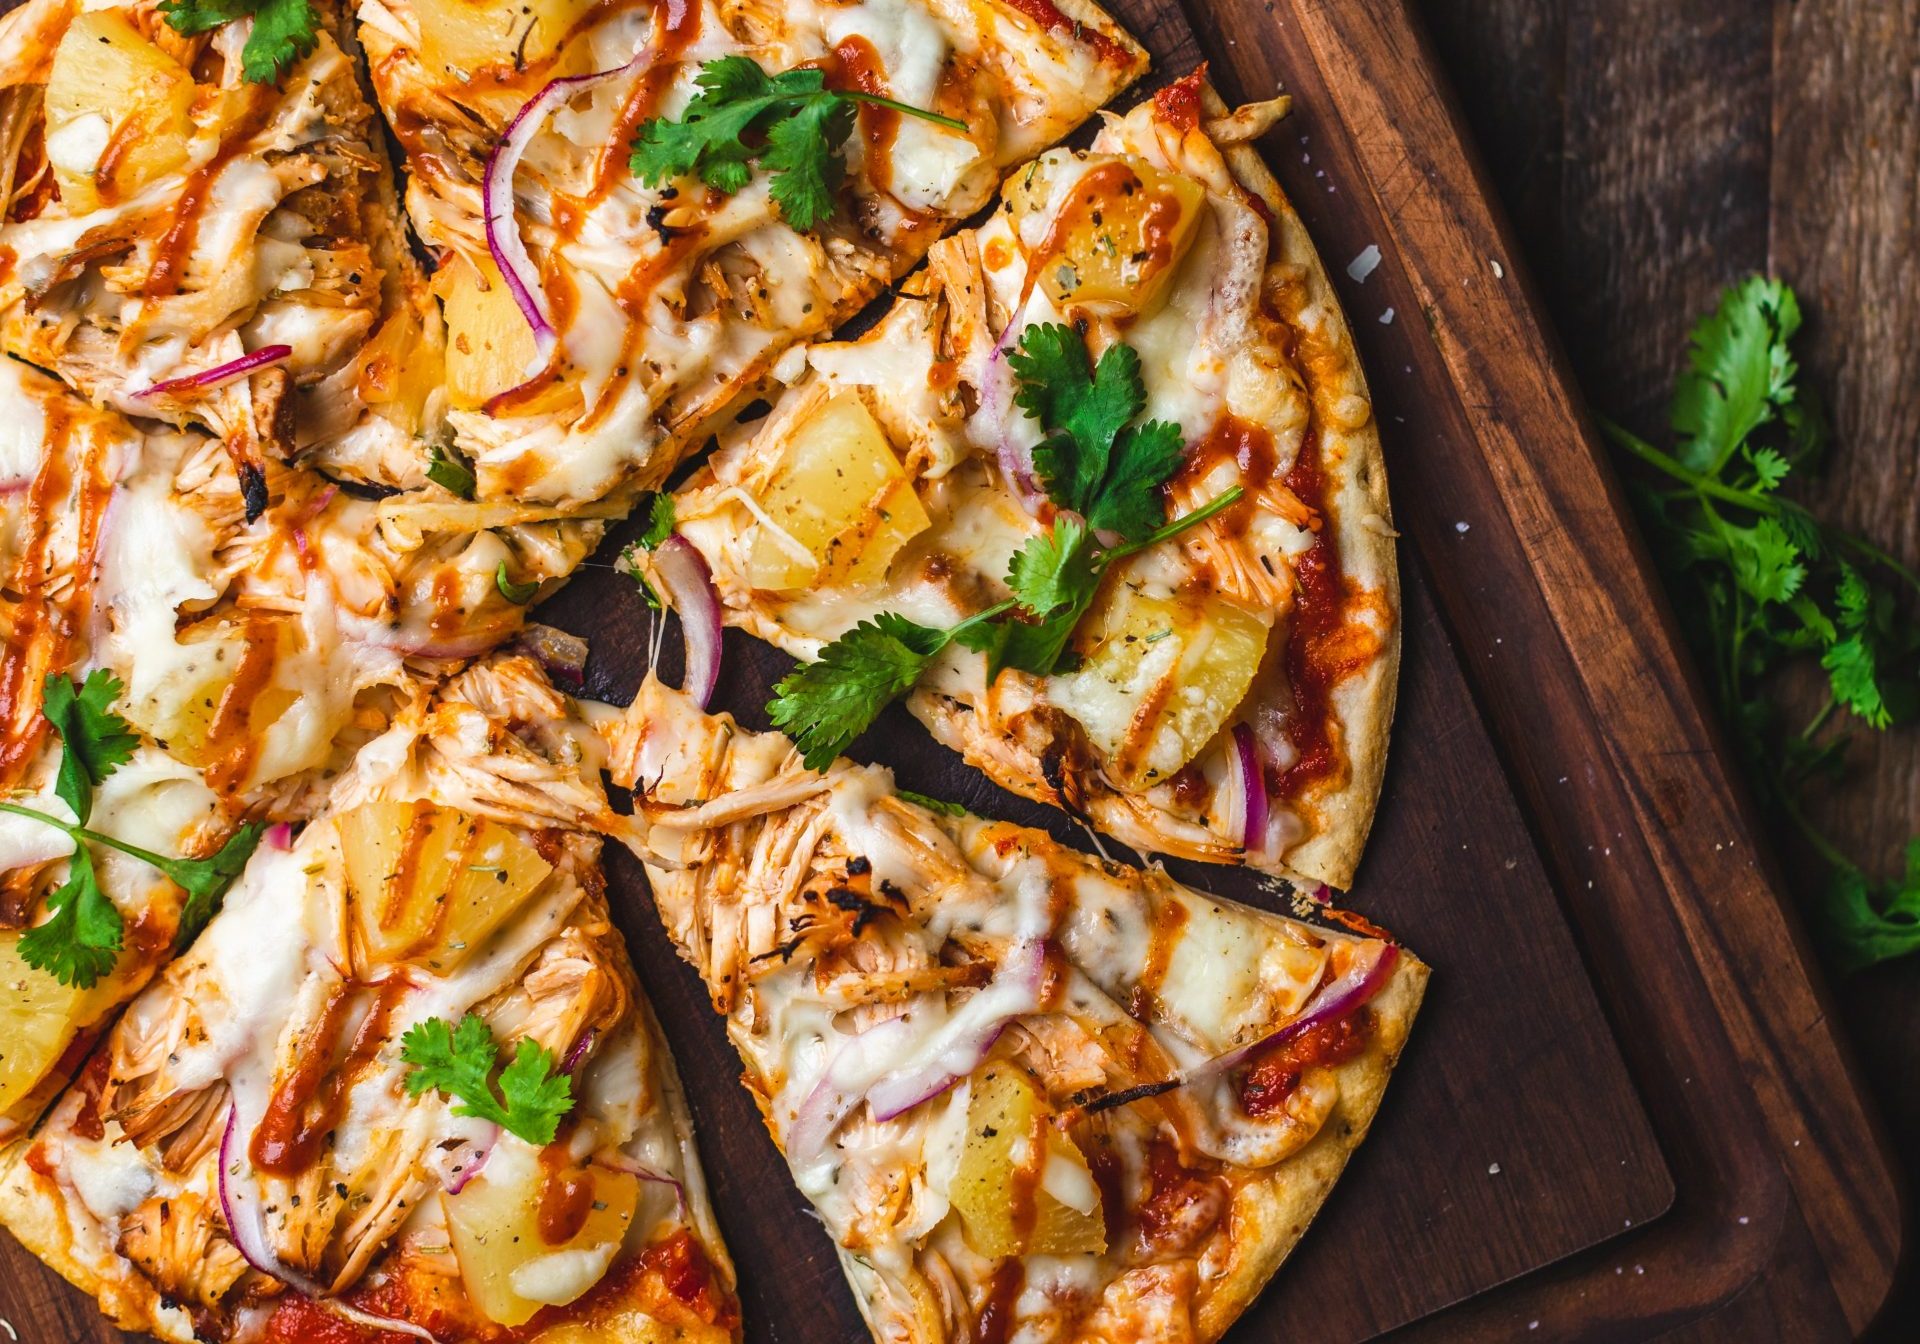 sliced ready meal pizza with some herbs and onions aside on a wooden board on wooden background